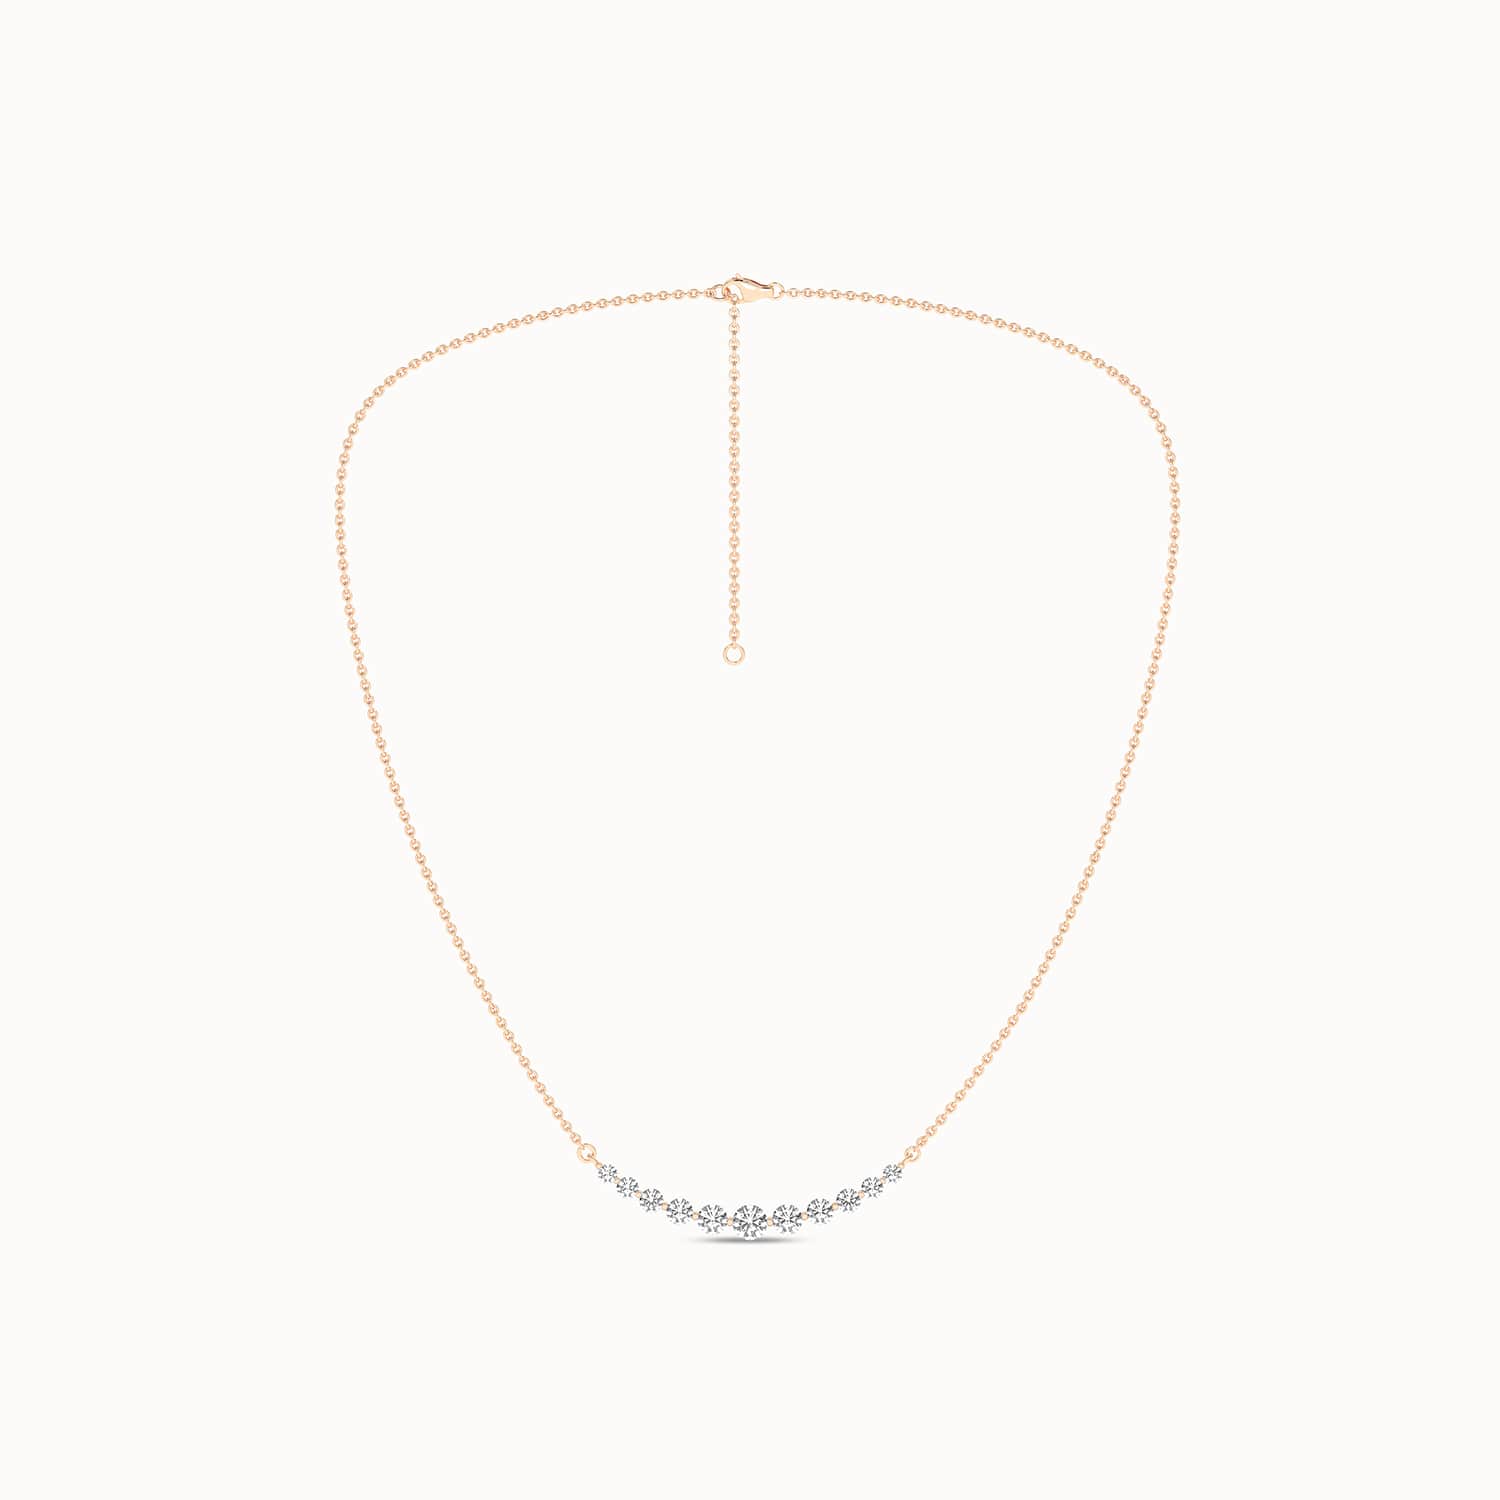 Captivating Necklace_Product Angle_1/2Ct. - 1